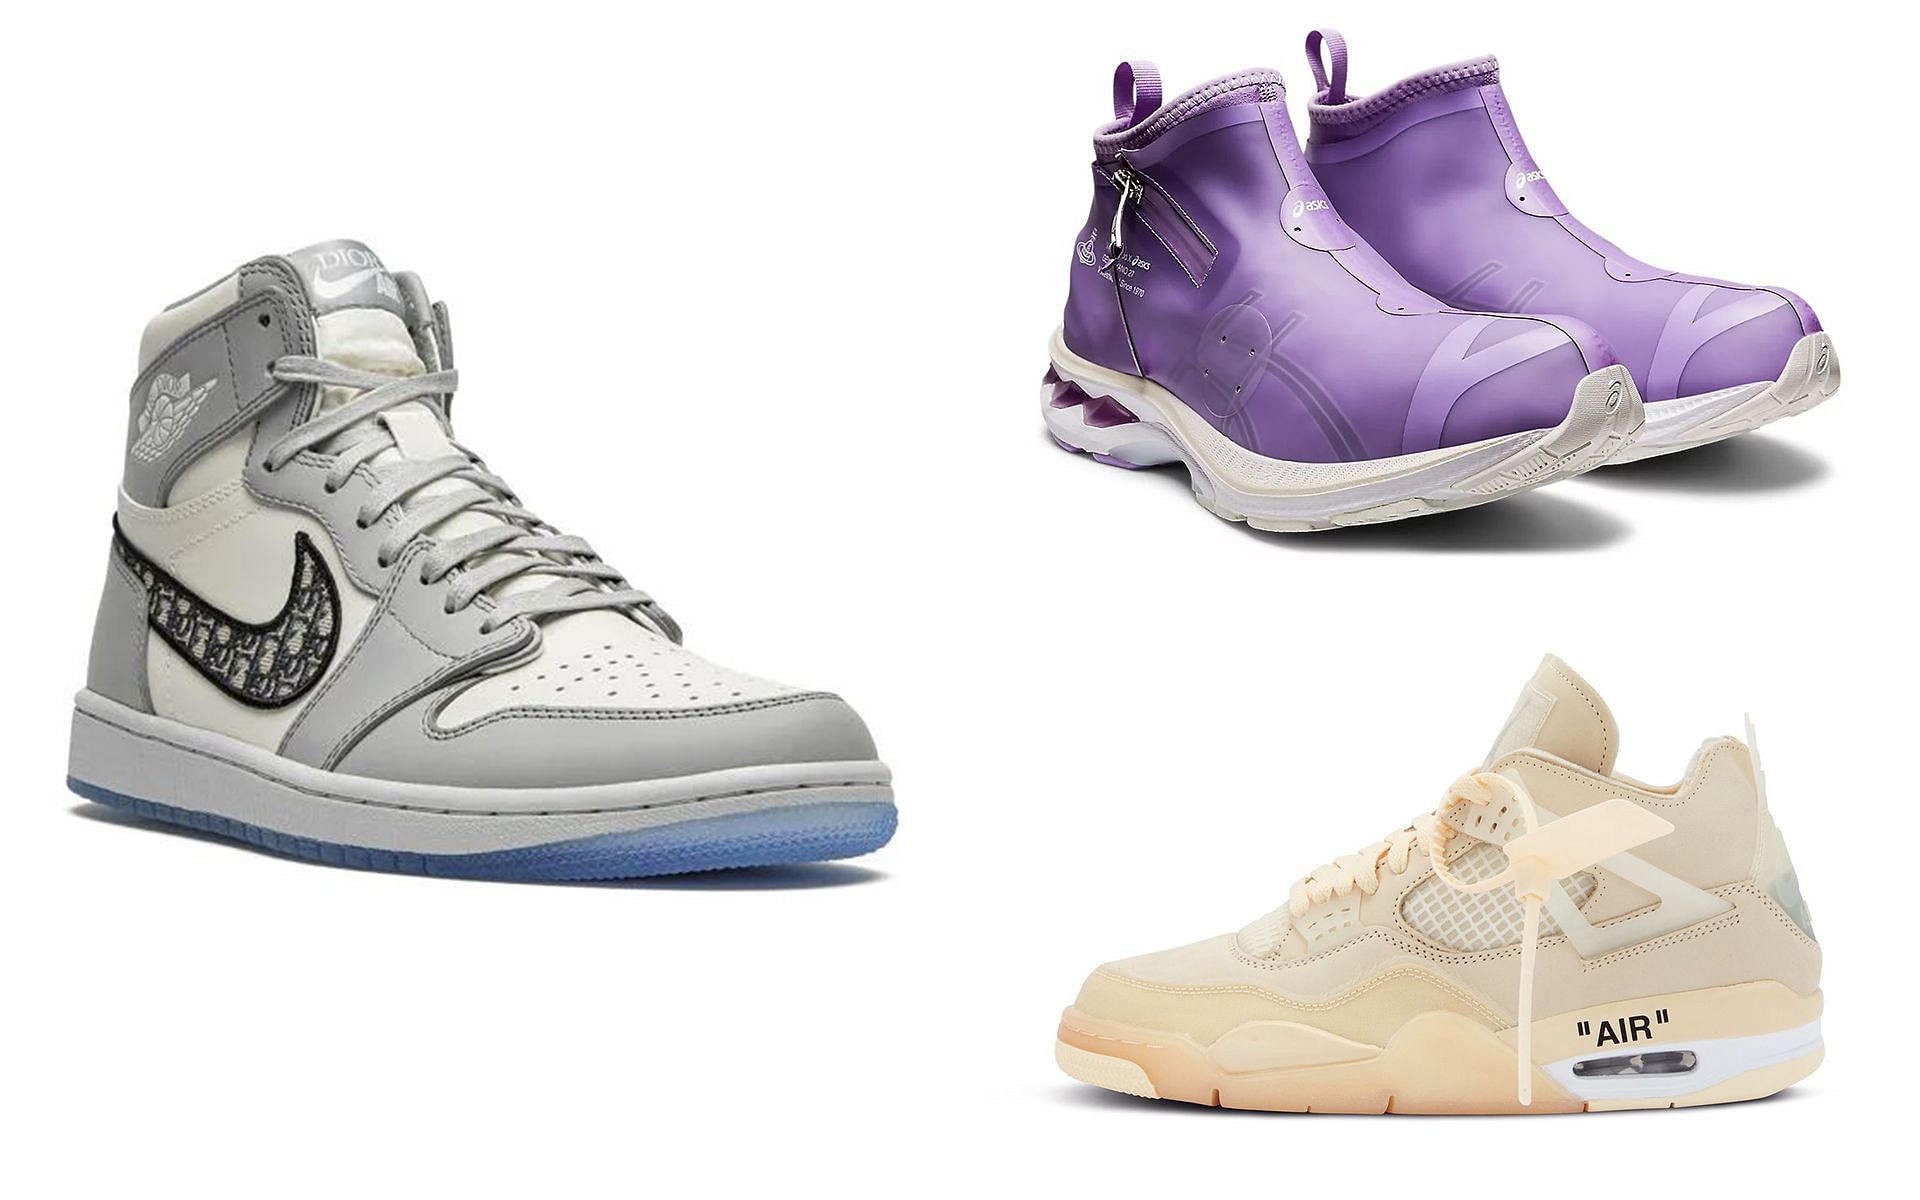 5 of the best designer sneaker collaborations over the years (Image via Nike and ASICS)